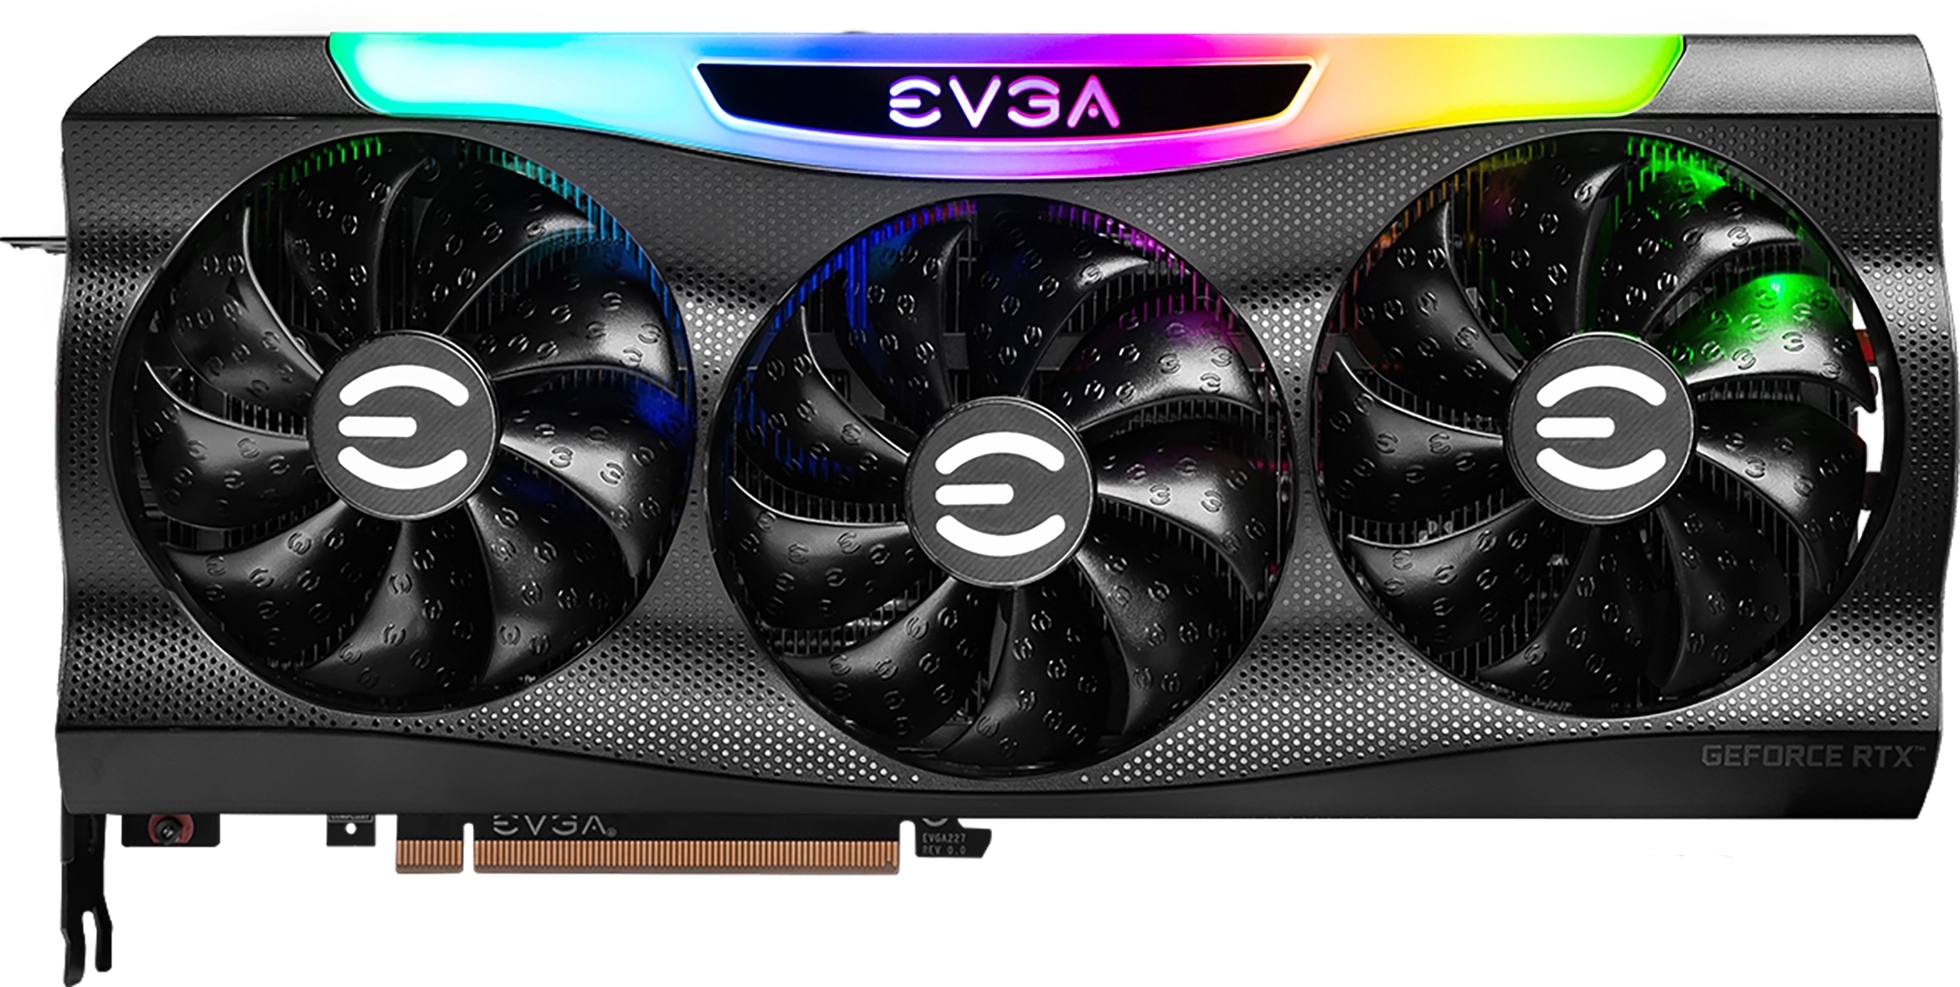 EVGA GeForce RTX 3090 FTW3 ULTRA Top View